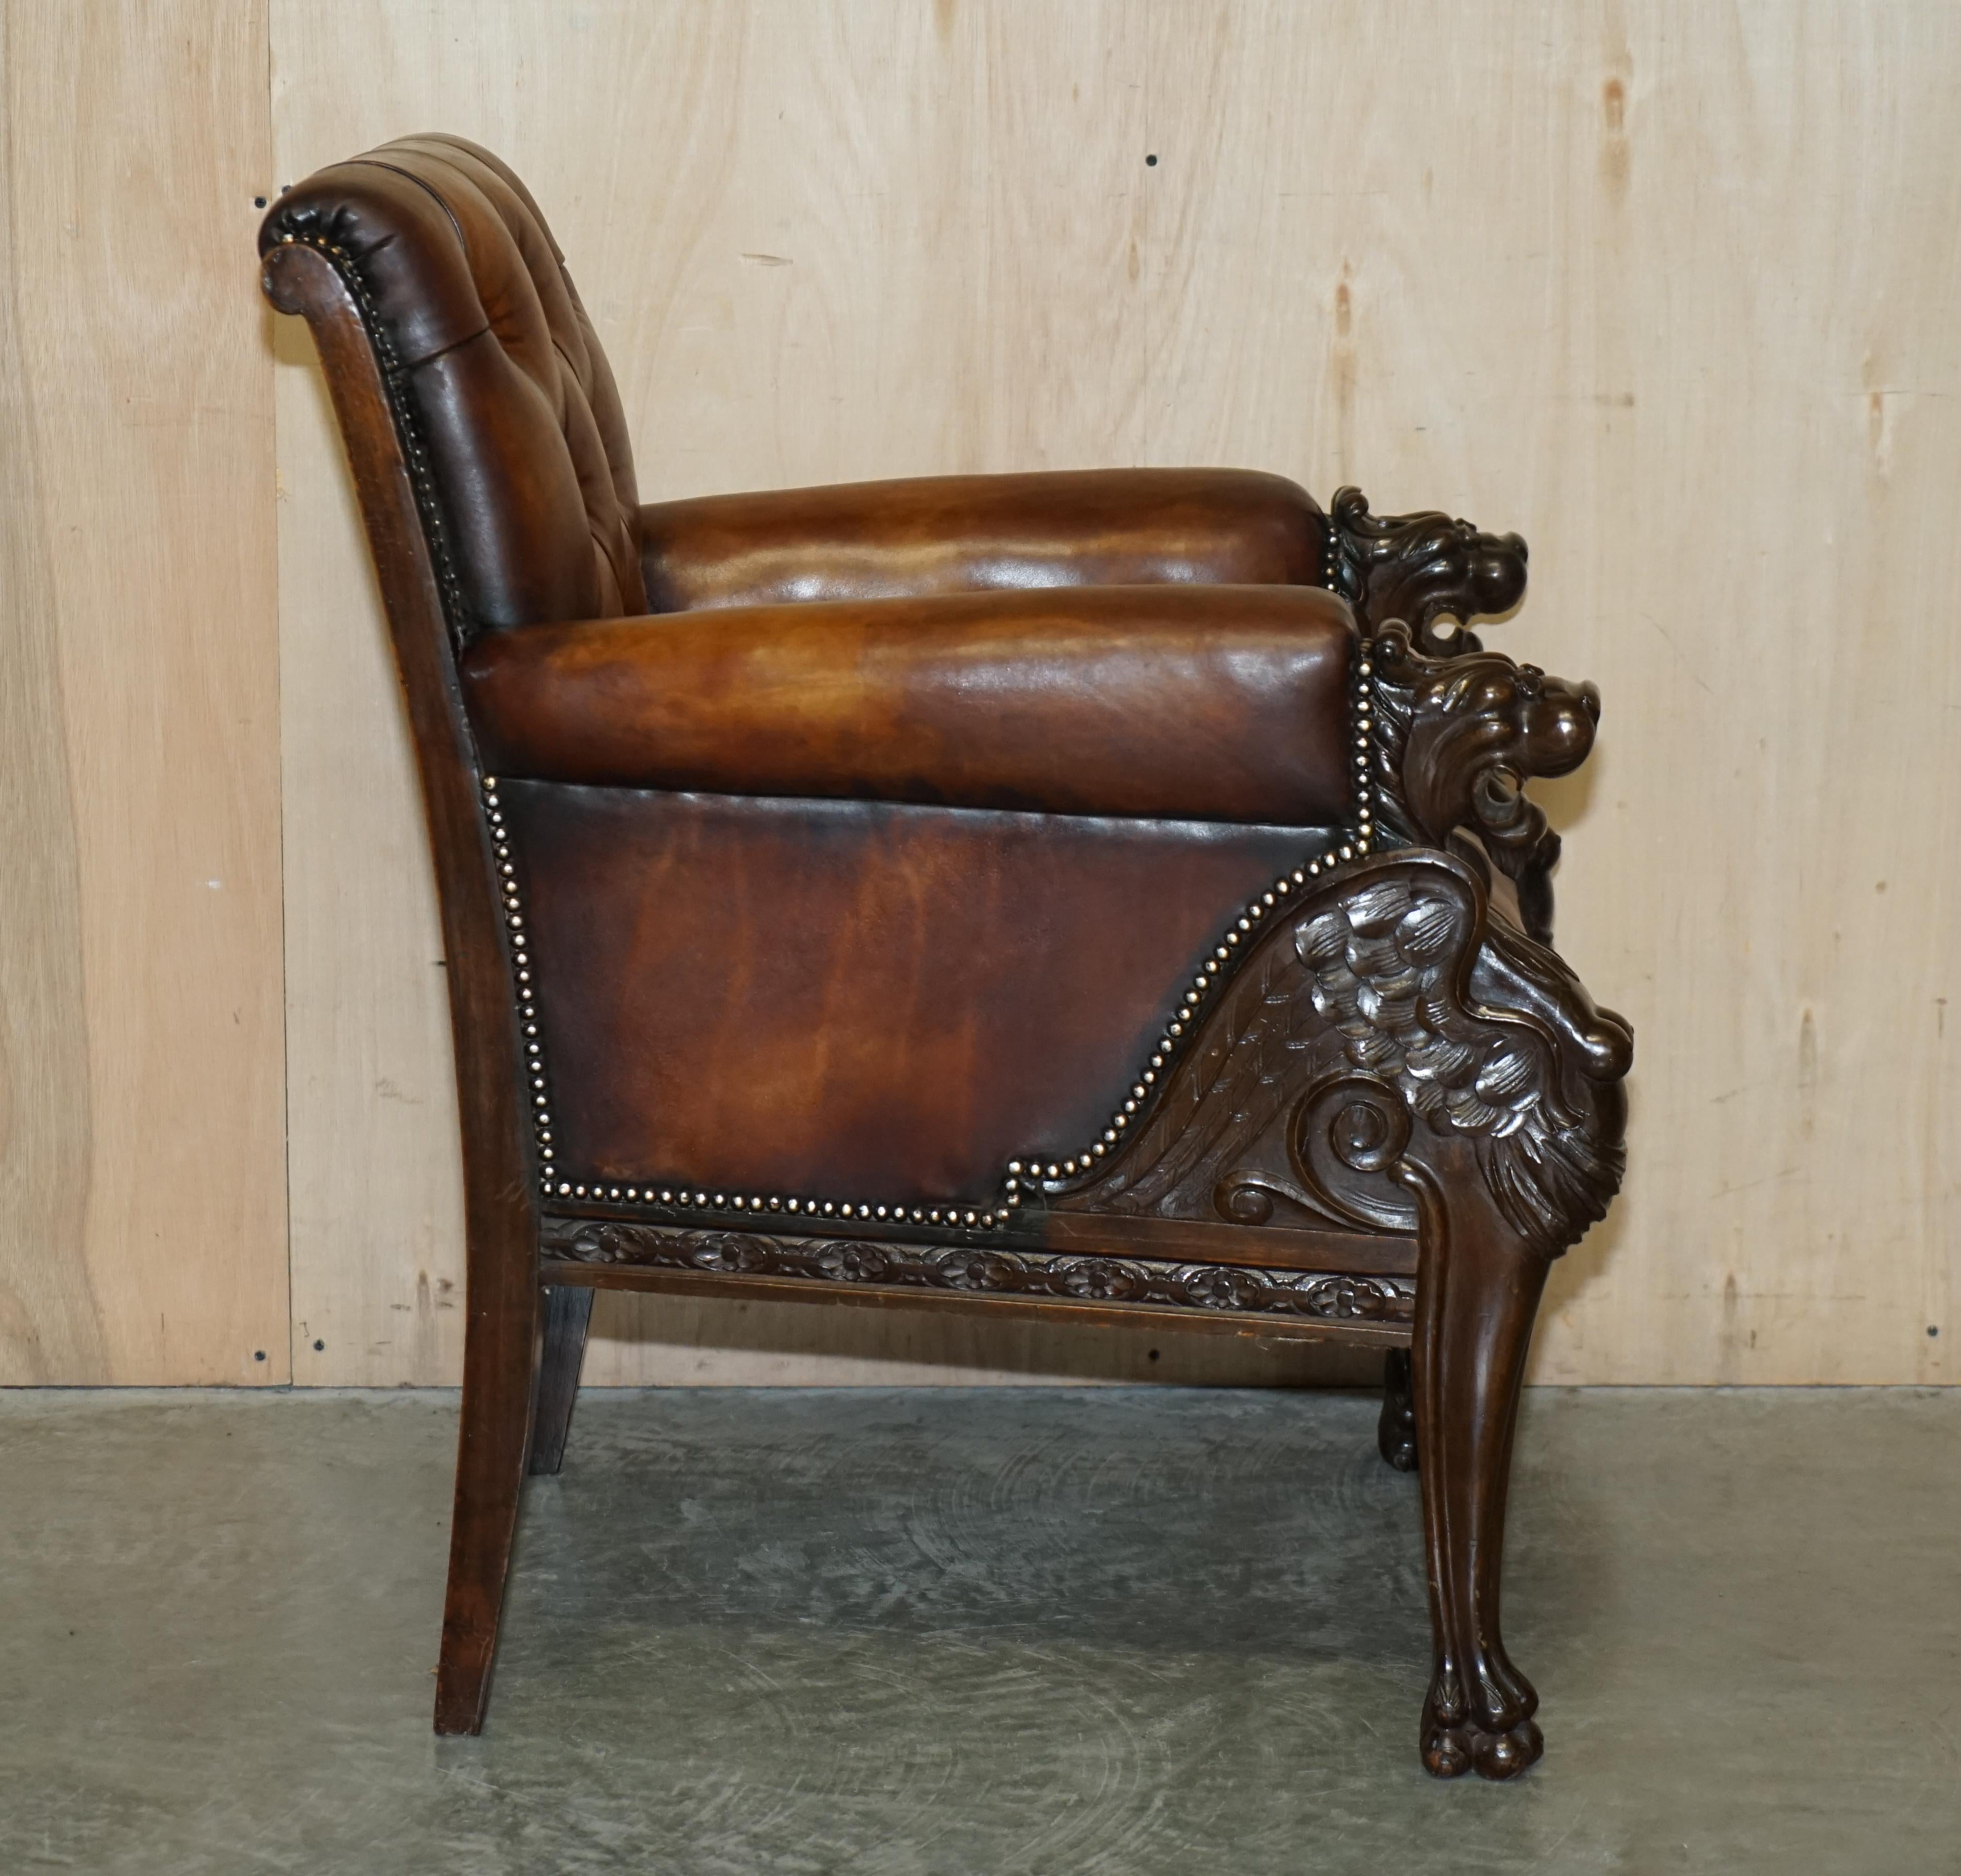 RESTORED ANTIQUE LiON HAND CARVED BROWN LEATHER CHESTERFIELD SOFA ARMCHAIR SUITE im Angebot 12